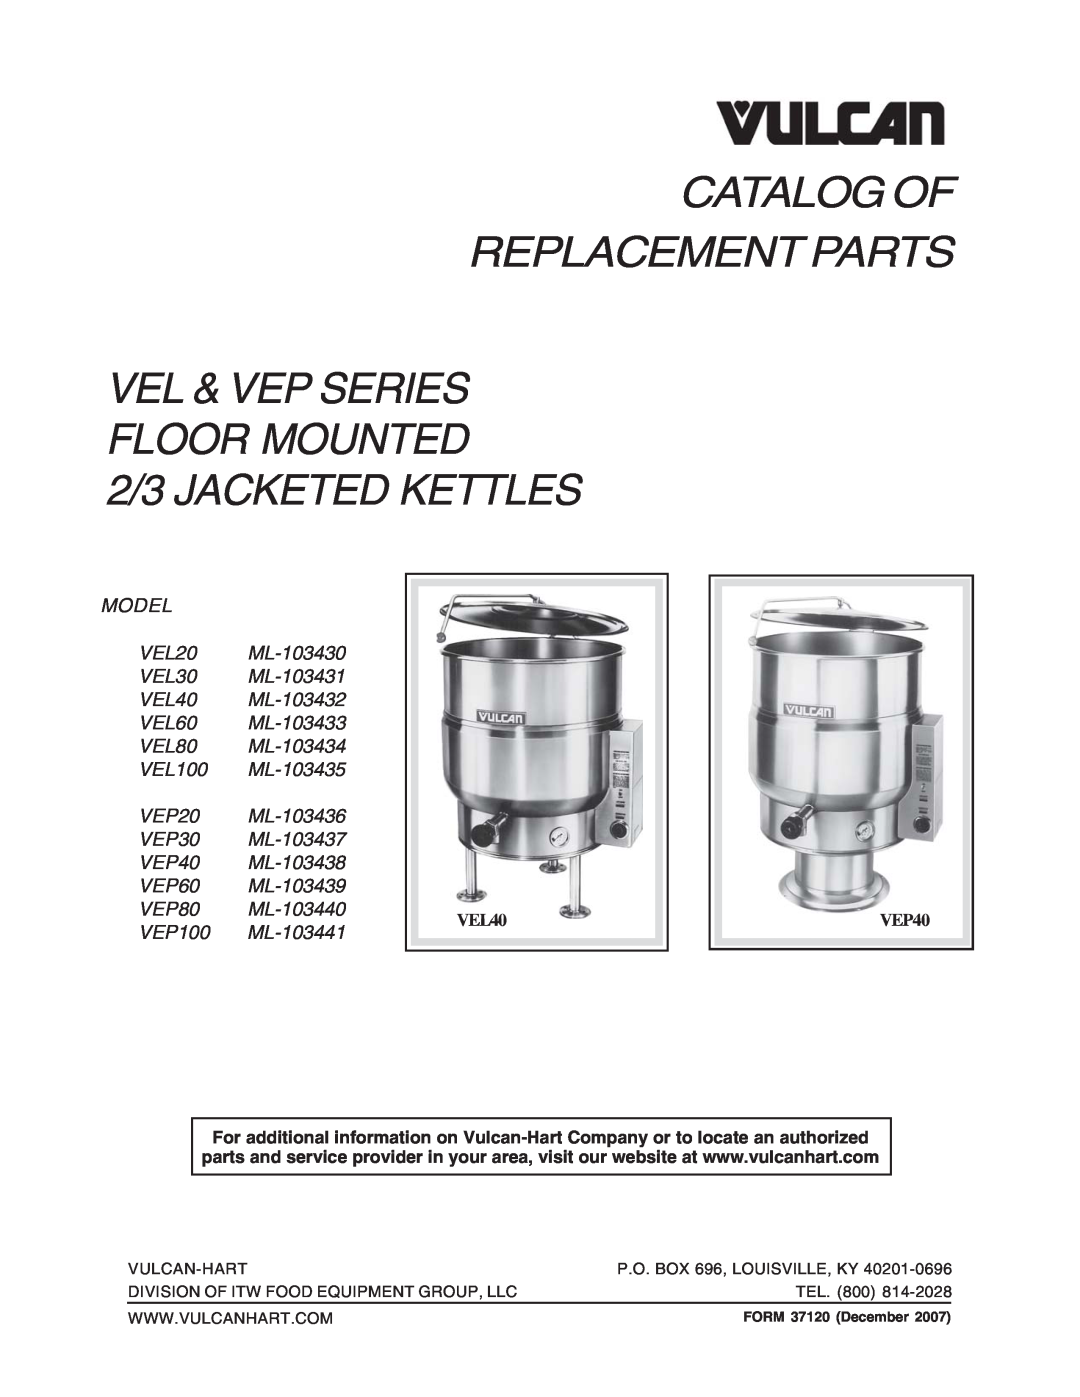 Vulcan-Hart VEP30, VEP80 manual FORM 37120 December, Catalog Of Replacement Parts, 2/3 JACKETED KETTLES, VEL40, VEP40, Tel 